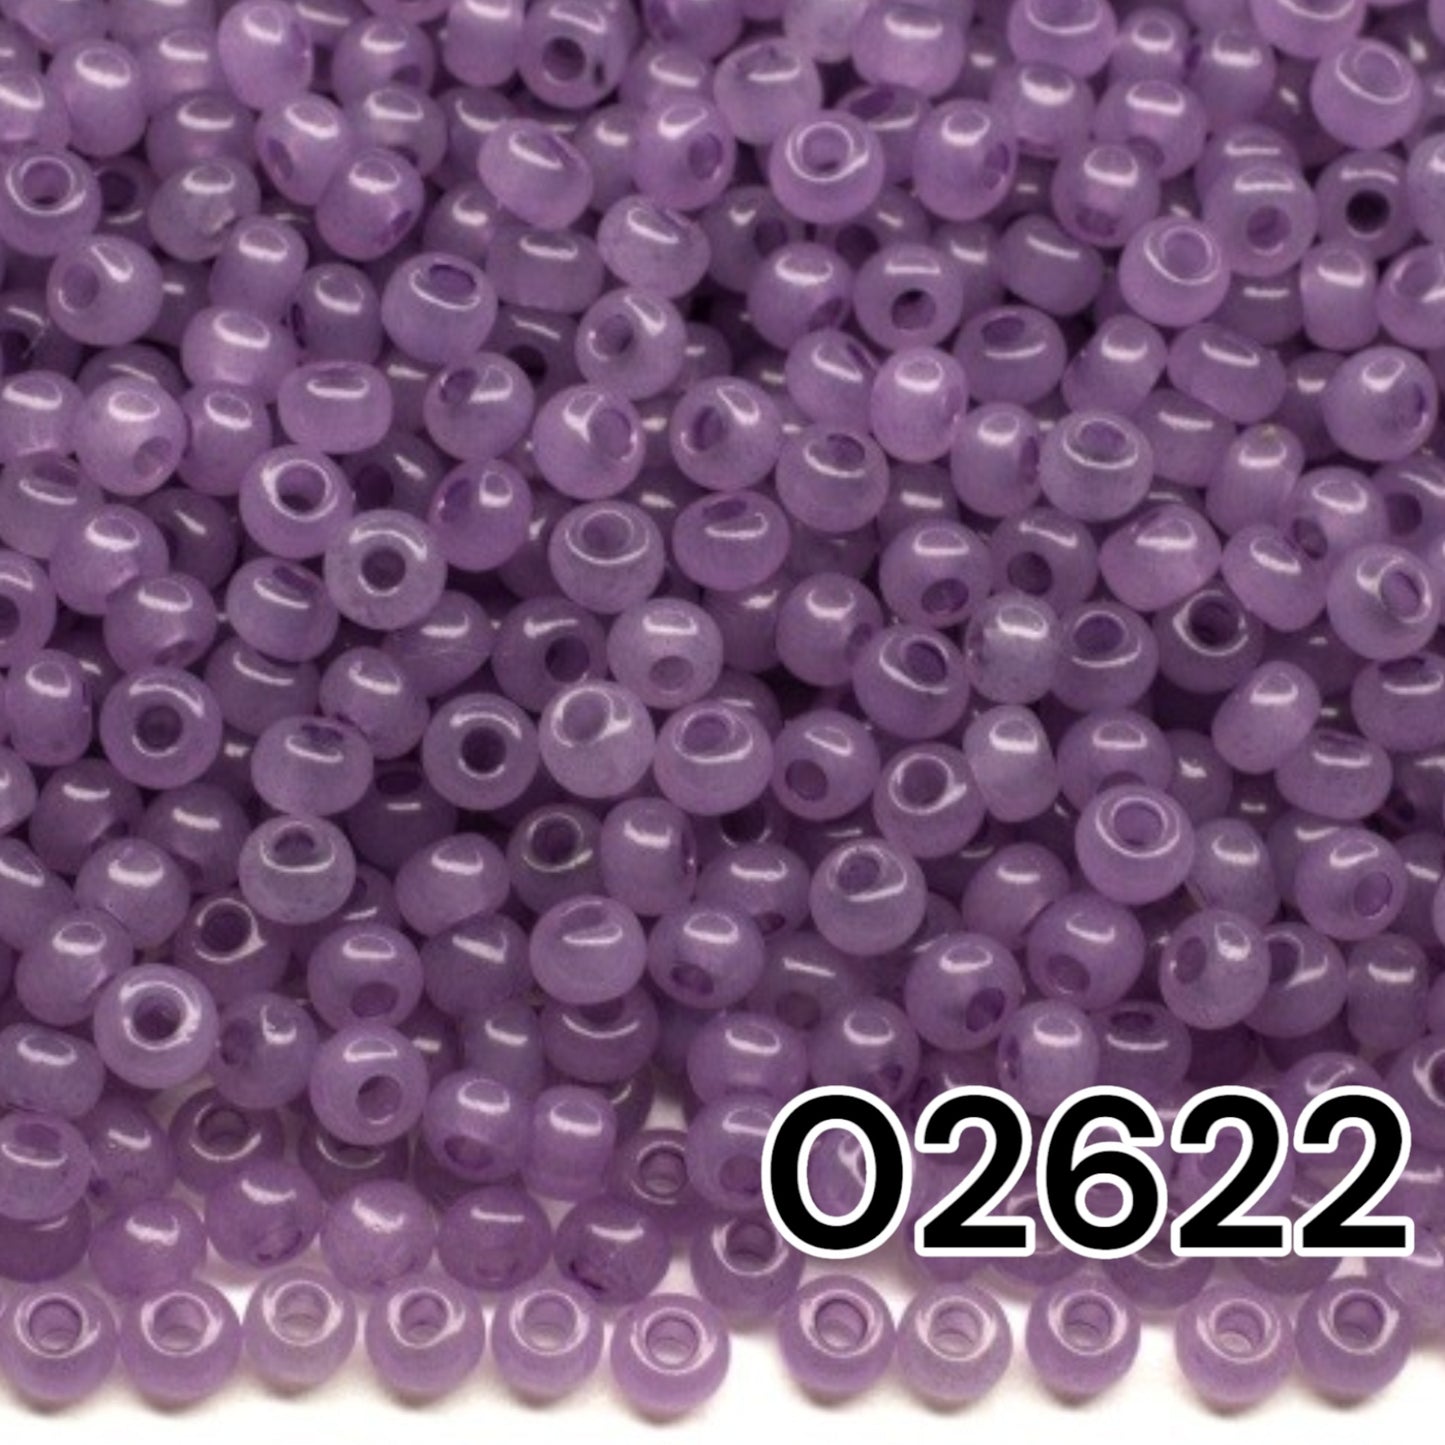 02622 Czech seed beads PRECIOSA round 10/0 lilac. Alabaster - Solgel Dyed.